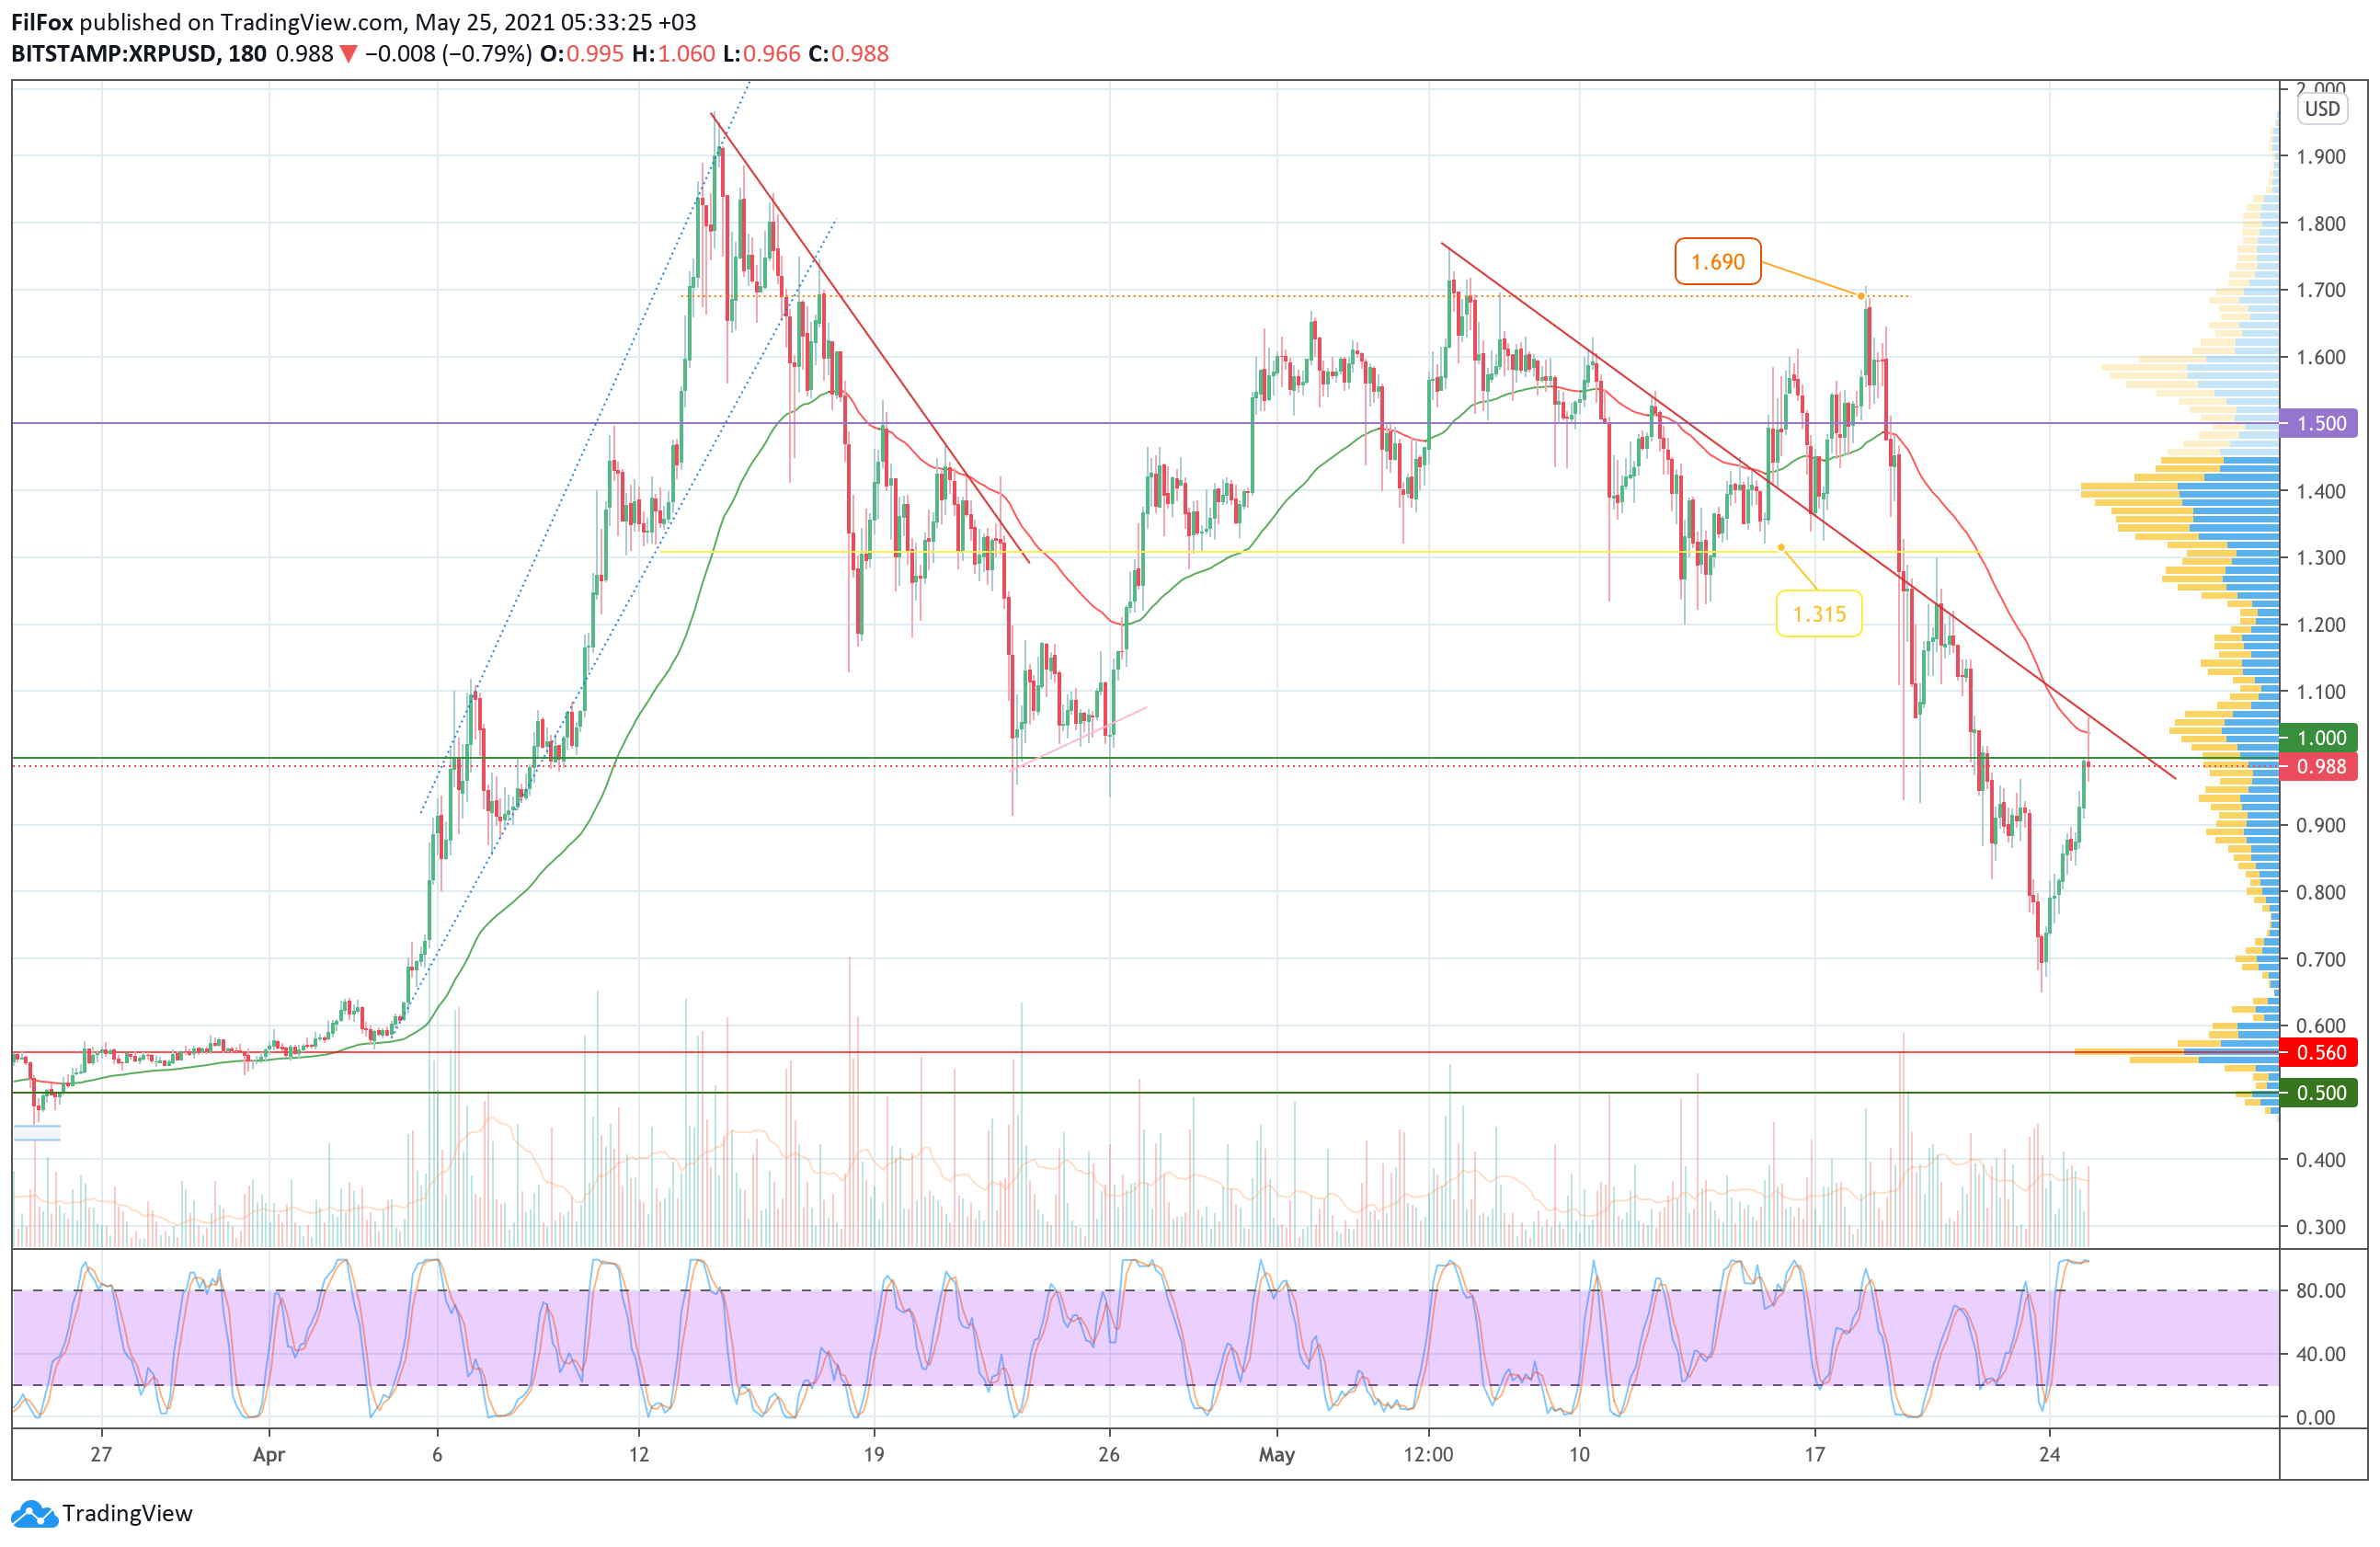 Analysis of the prices of Bitcoin, Ethereum, XRP for 05/25/2021